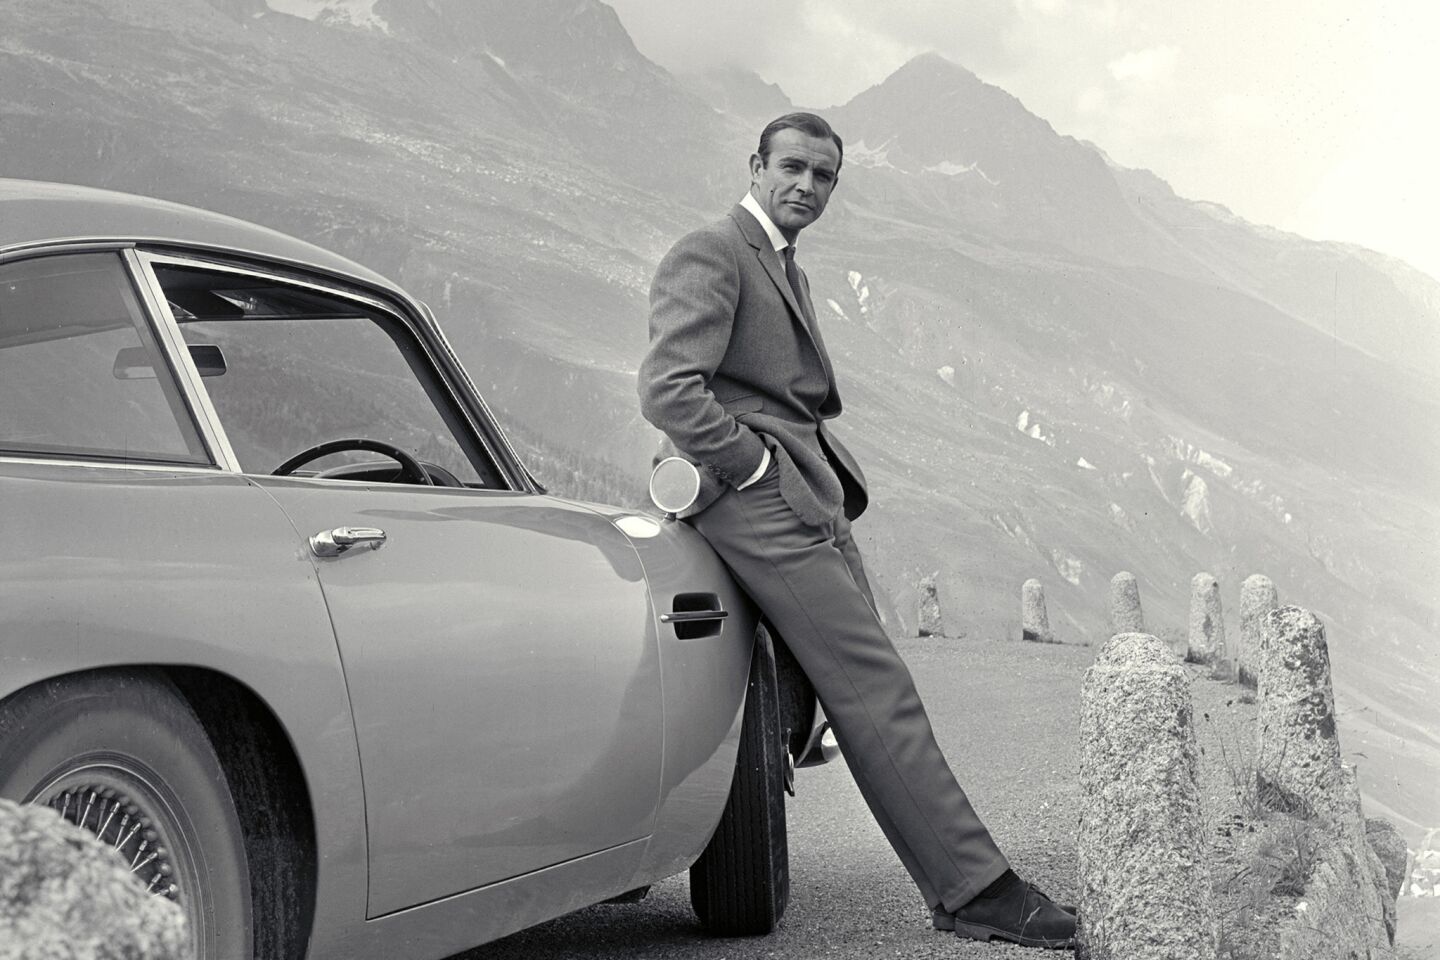 Sean Connery poses with his signature Aston Martin in the 1964 movie Goldfinger.